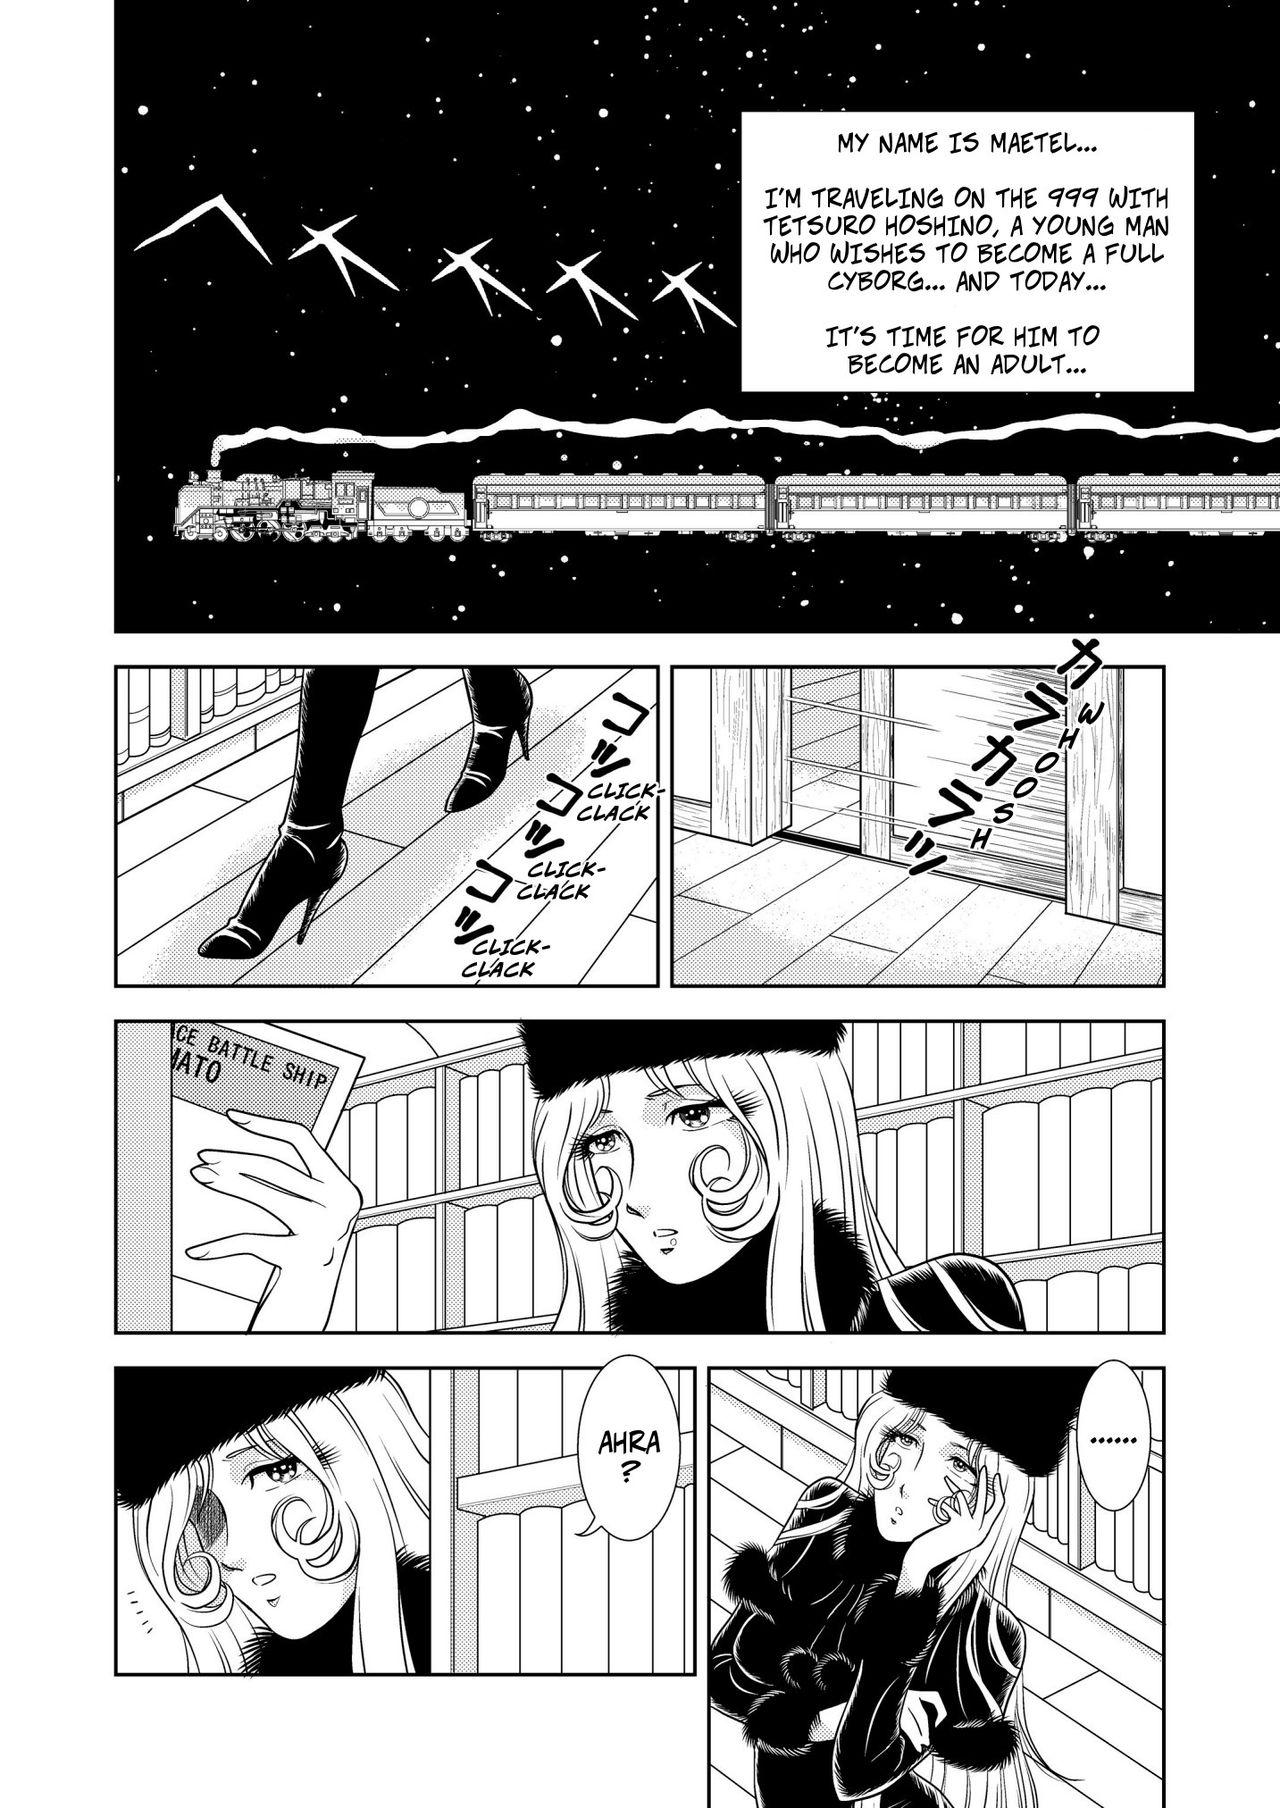 Thick Maetel Story 2 - Galaxy express 999 Tanned - Page 2